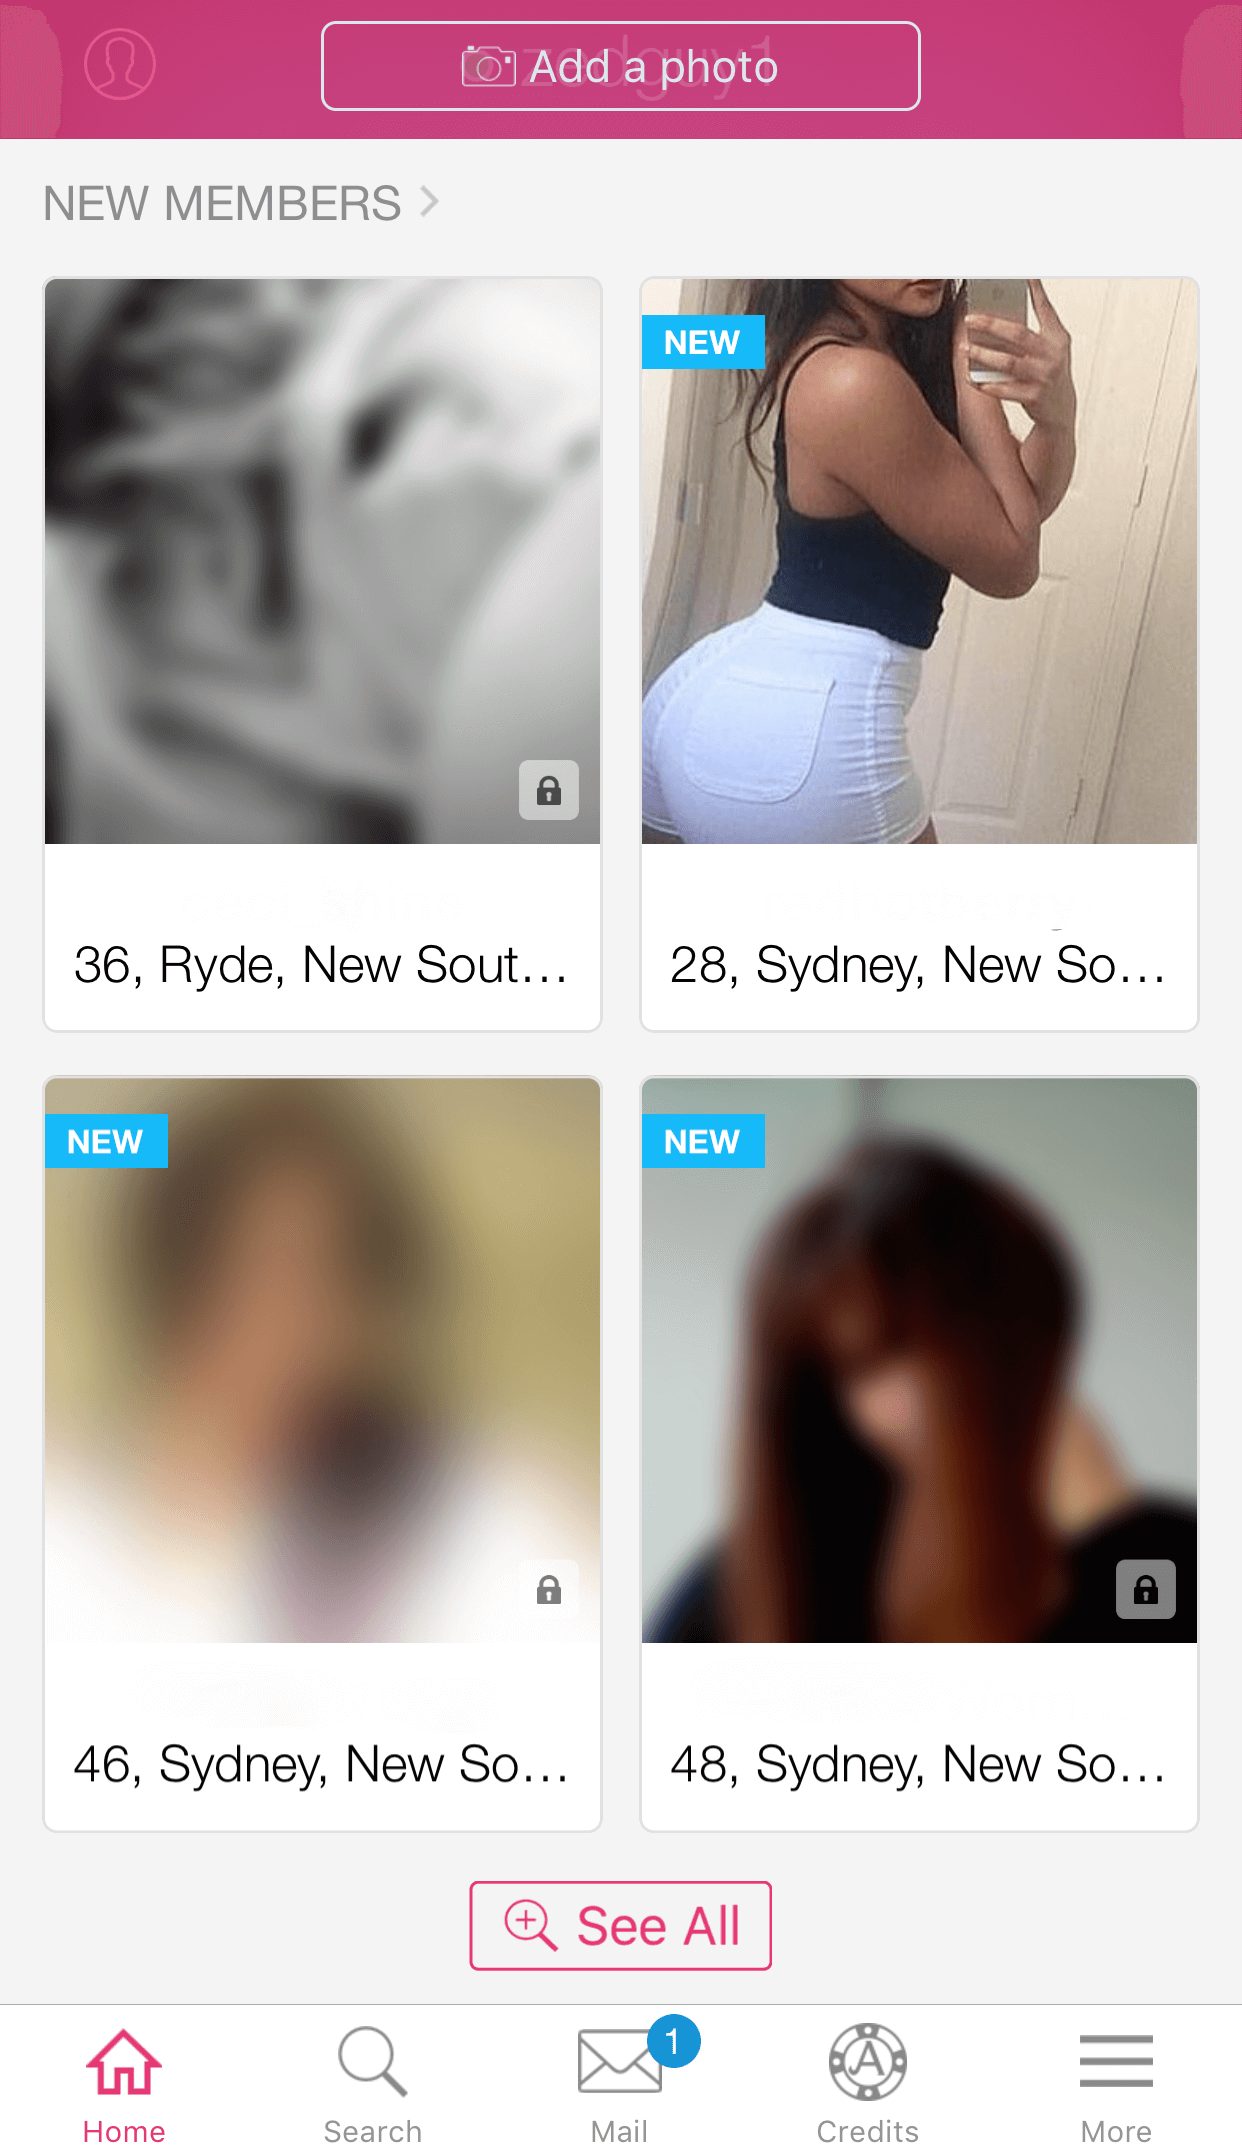 Best Hookup Sites in 2021: Comparison of the Most Popular Hookup Apps and Websites